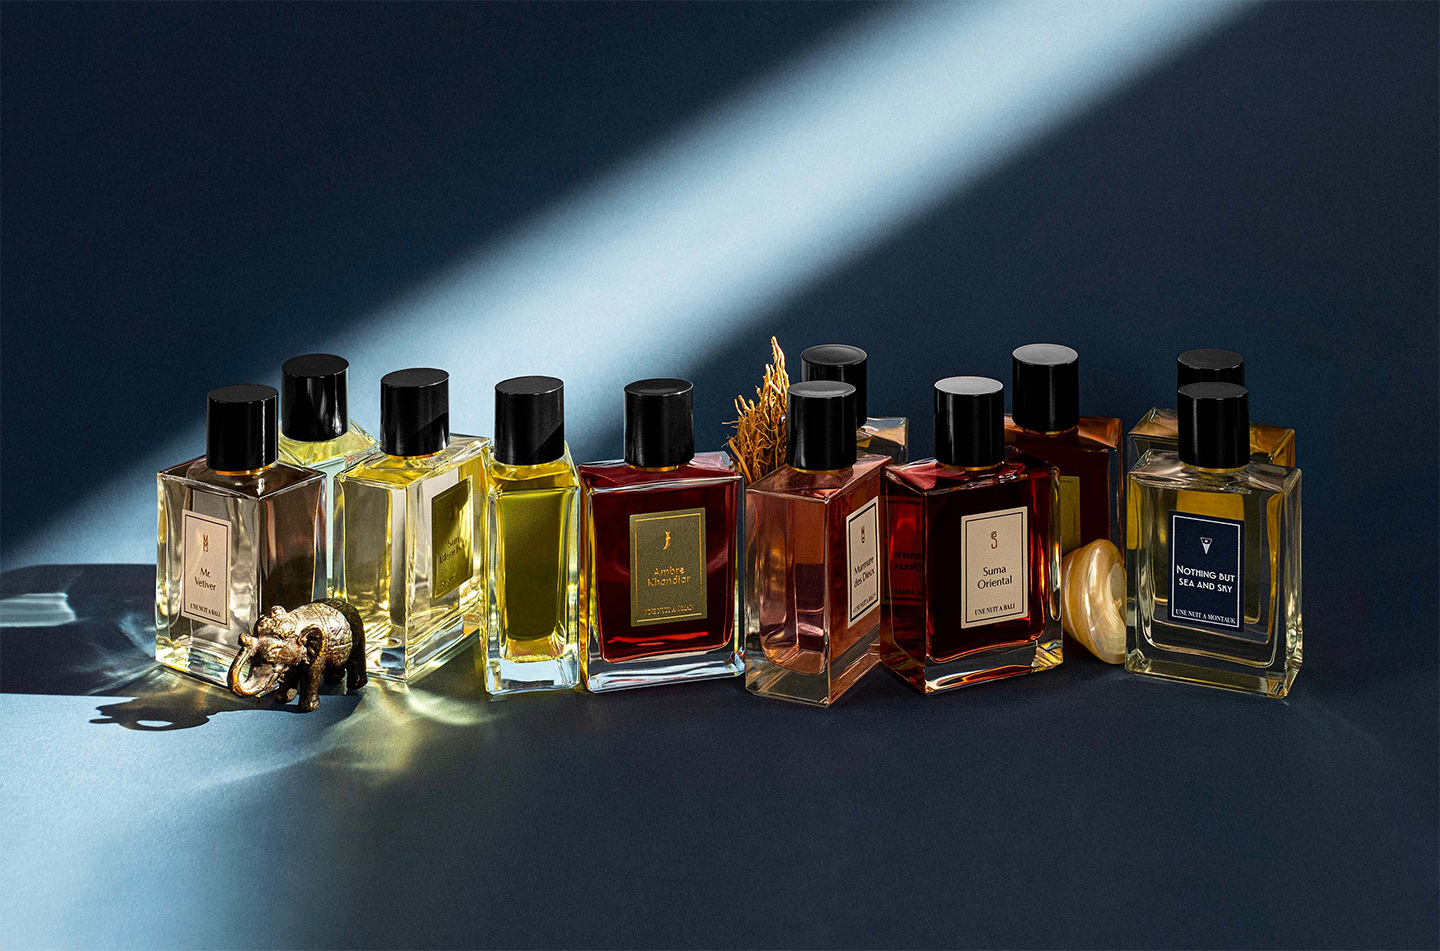 The world of scents by Une Nuit Nomade